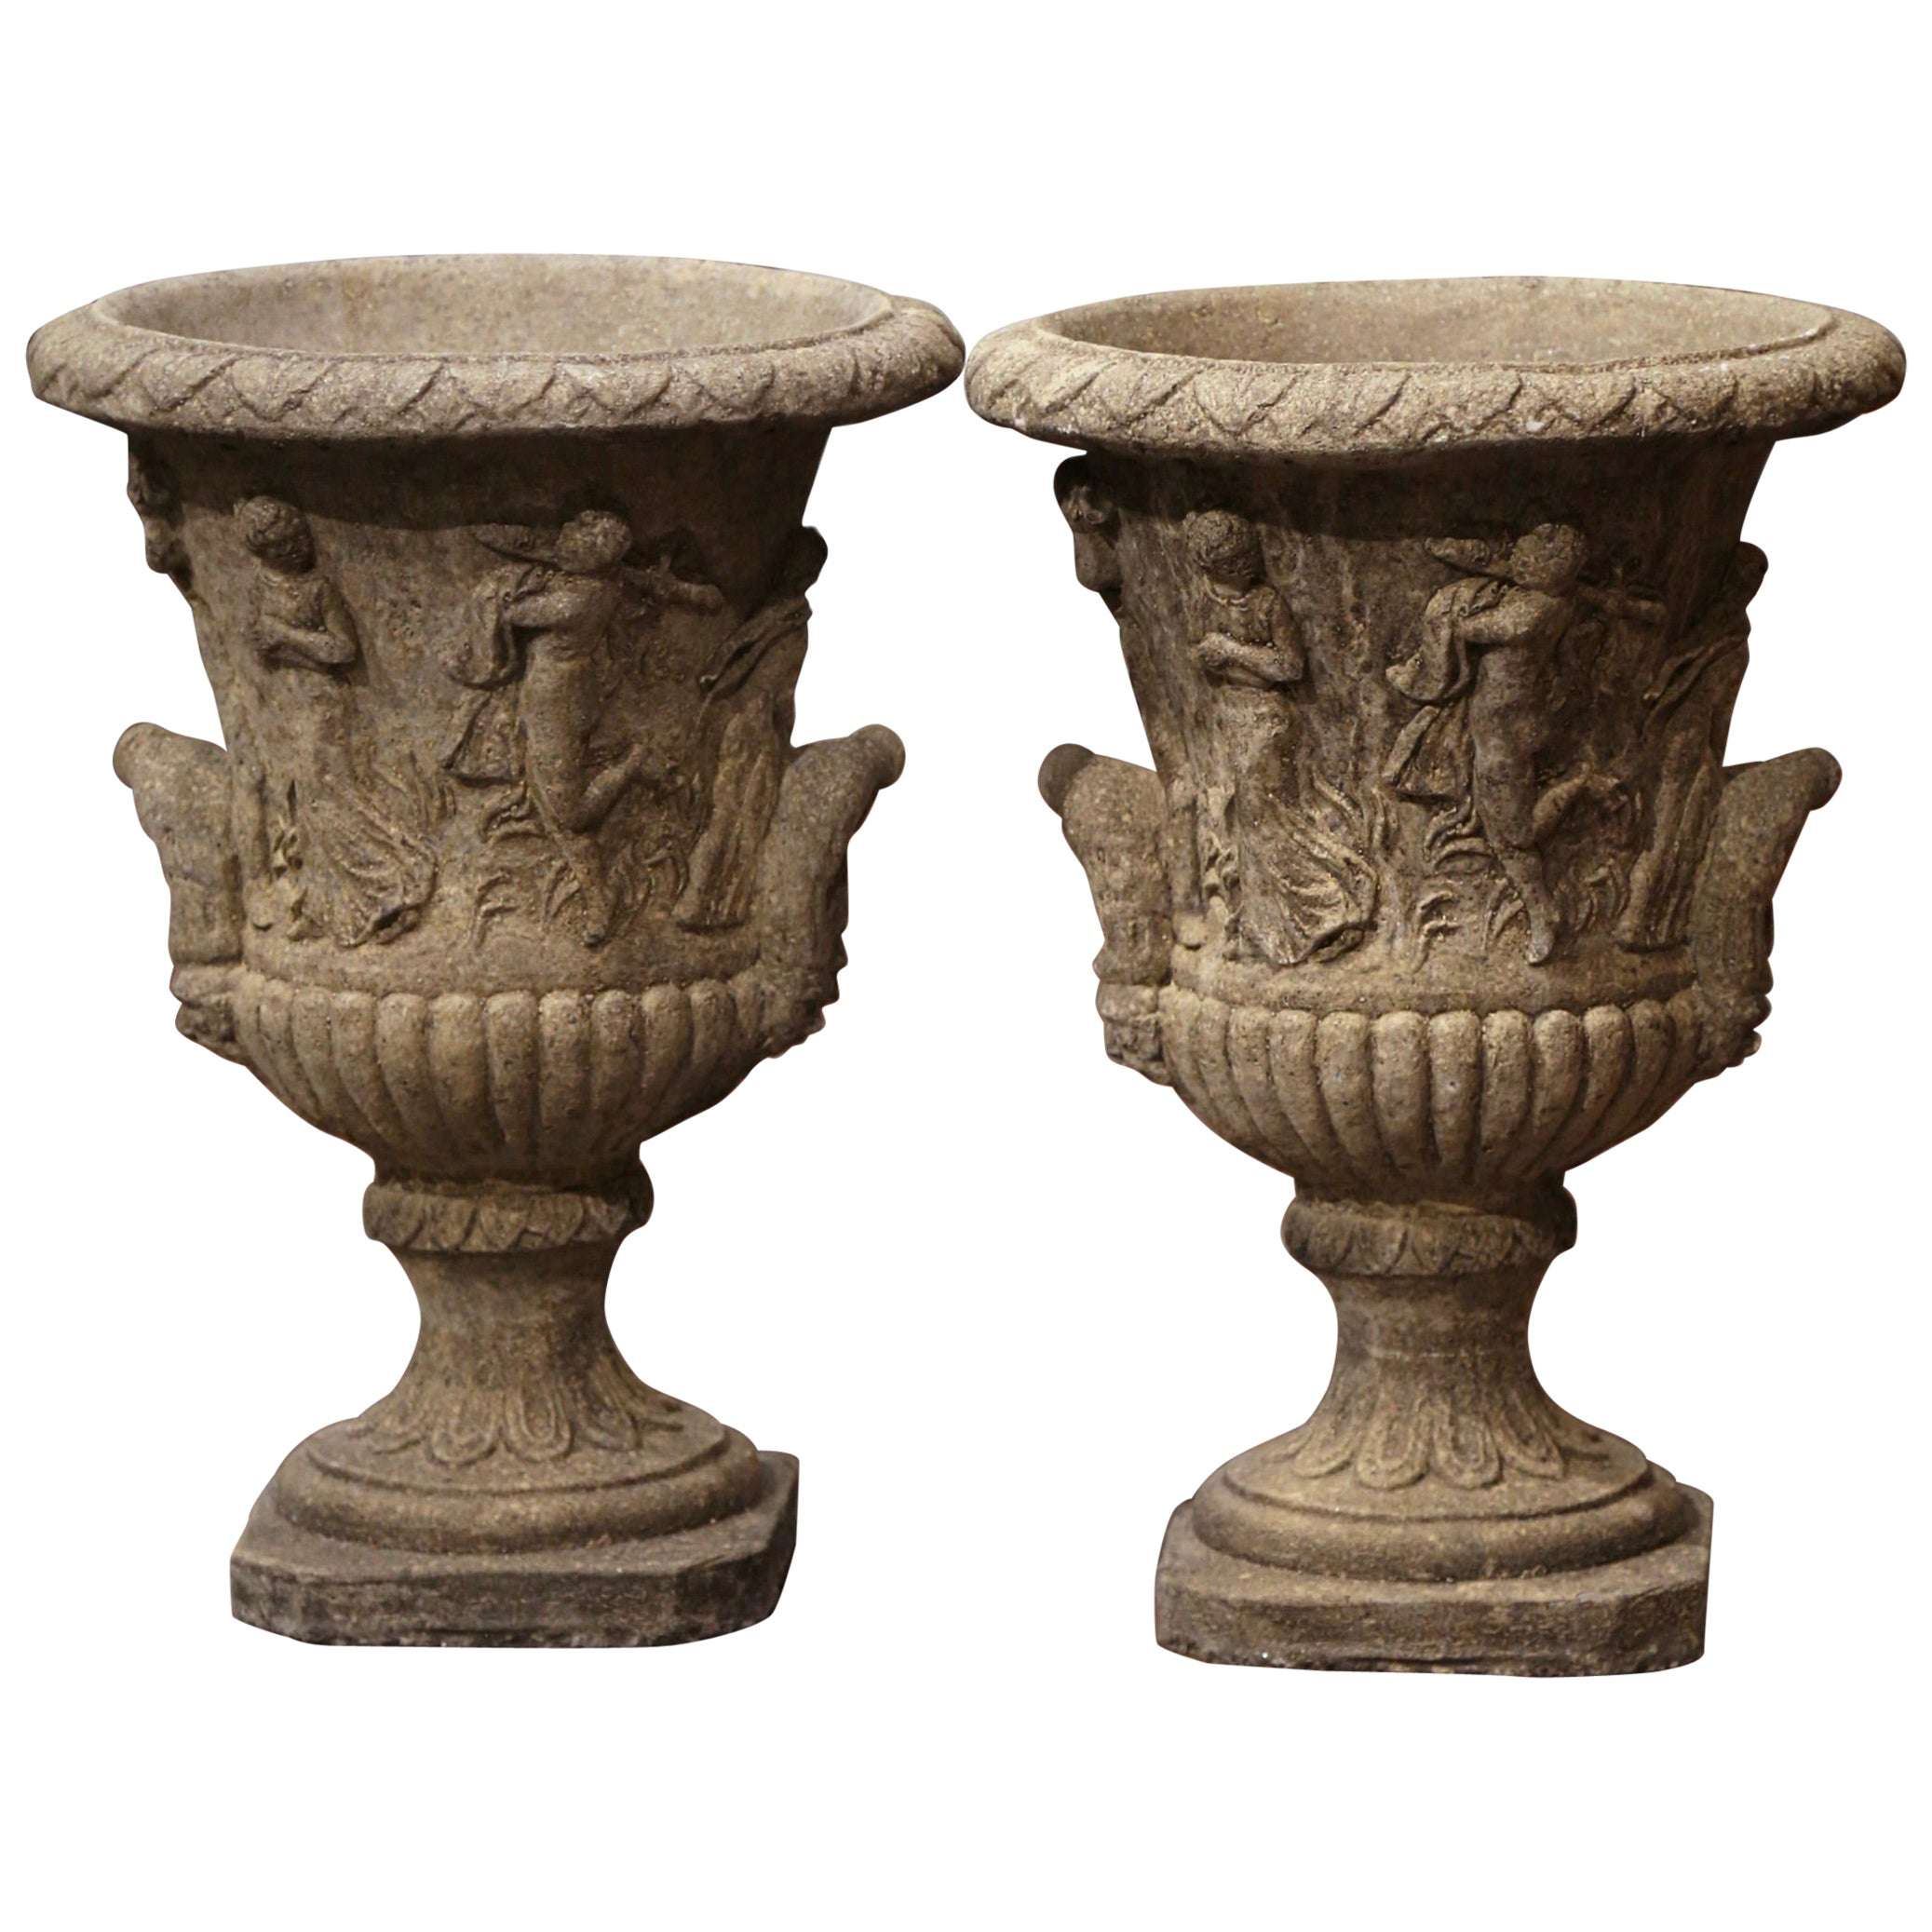 Pair of Mid-Century French Hand Carved Stone Campana-Form Outdoor Garden Urns